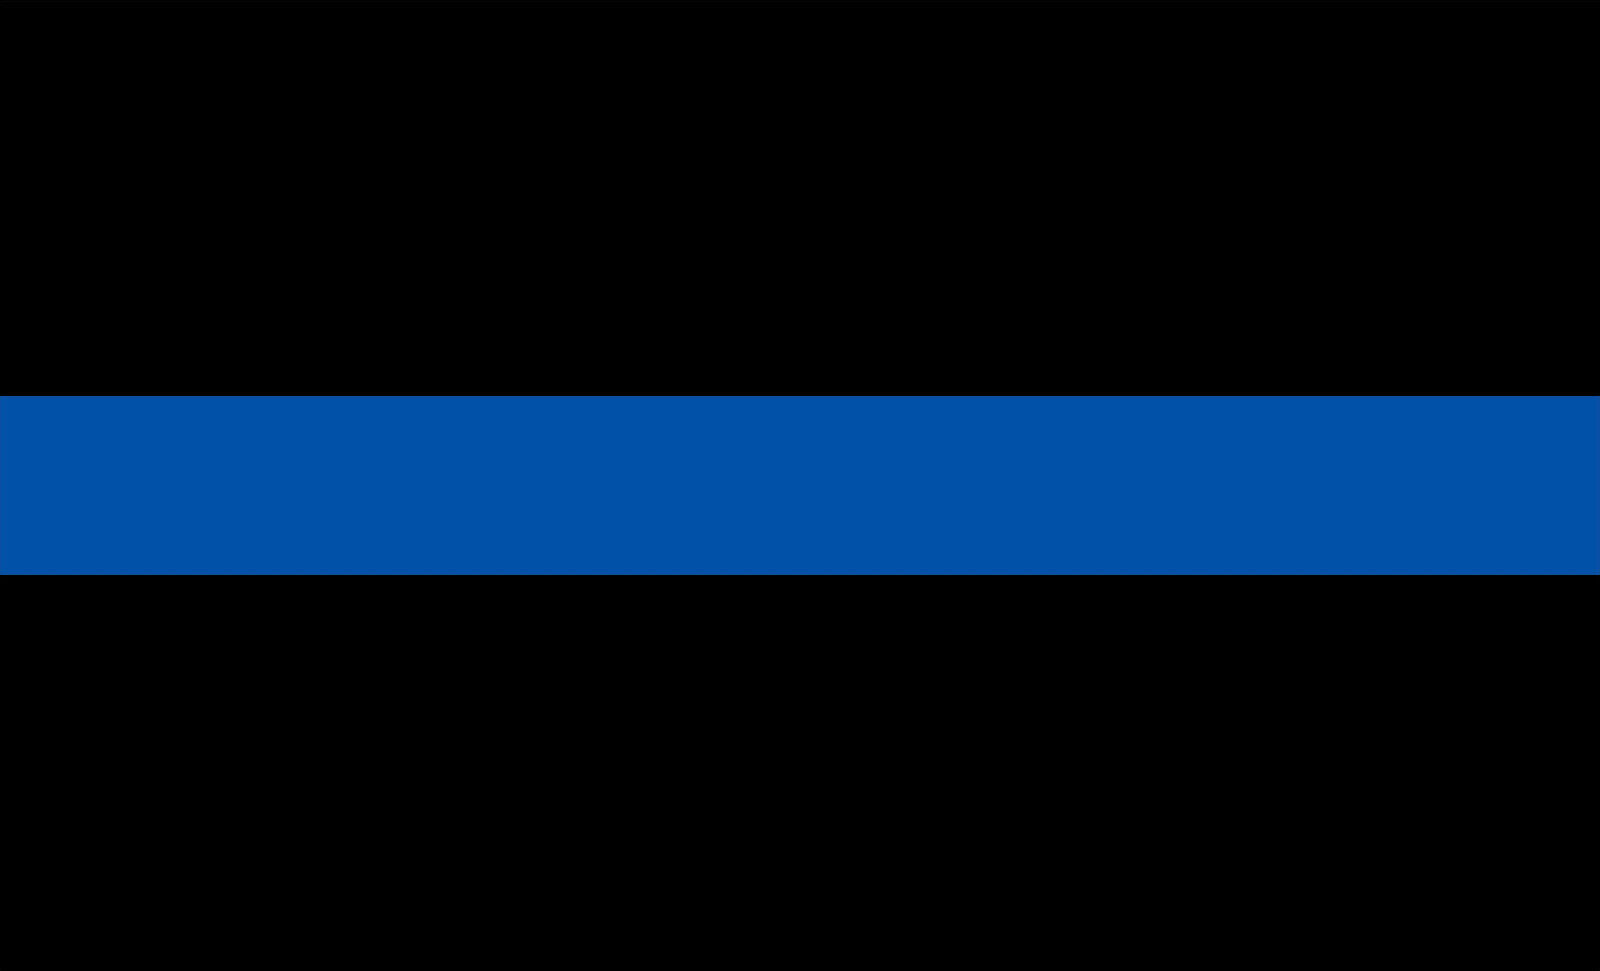 Thin Blue Line Decal Reflective 5"x3" Blue stripe Police LEO Officer Set of 2 - Powercall Sirens LLC